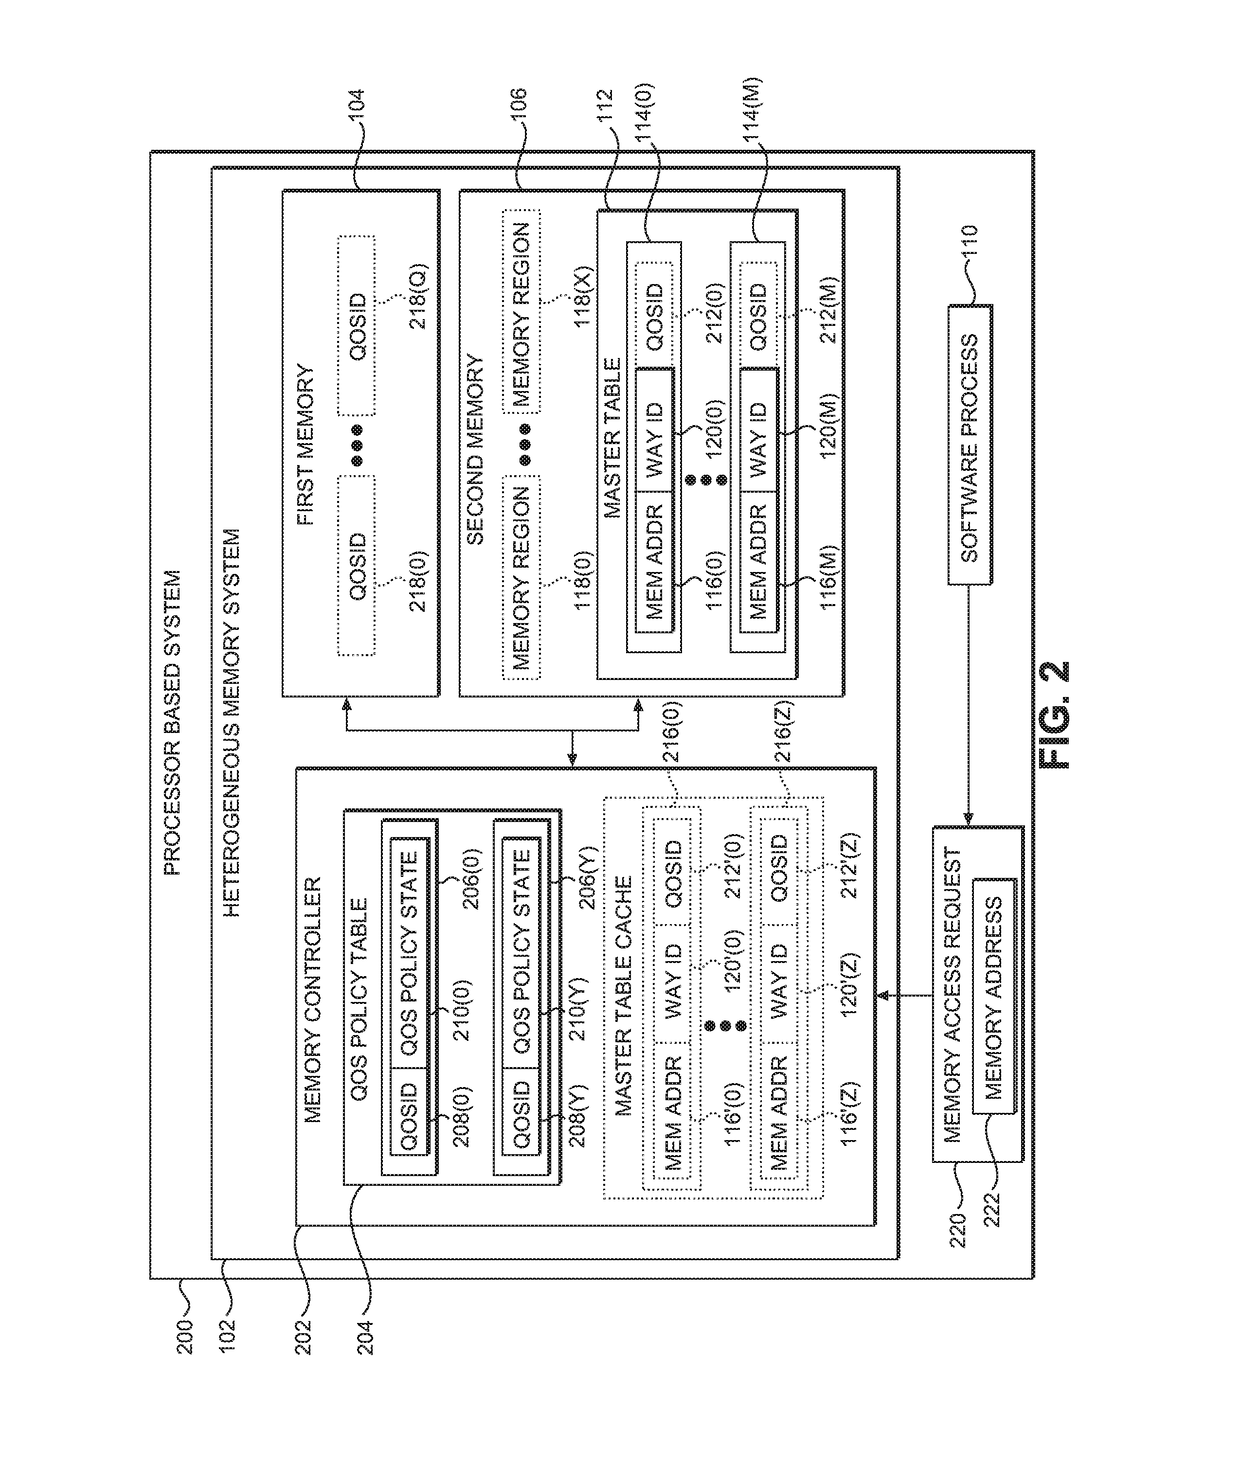 PROVIDING FLEXIBLE MANAGEMENT  OF HETEROGENEOUS MEMORY SYSTEMS USING SPATIAL QUALITY OF SERVICE (QoS) TAGGING IN PROCESSOR-BASED SYSTEMS